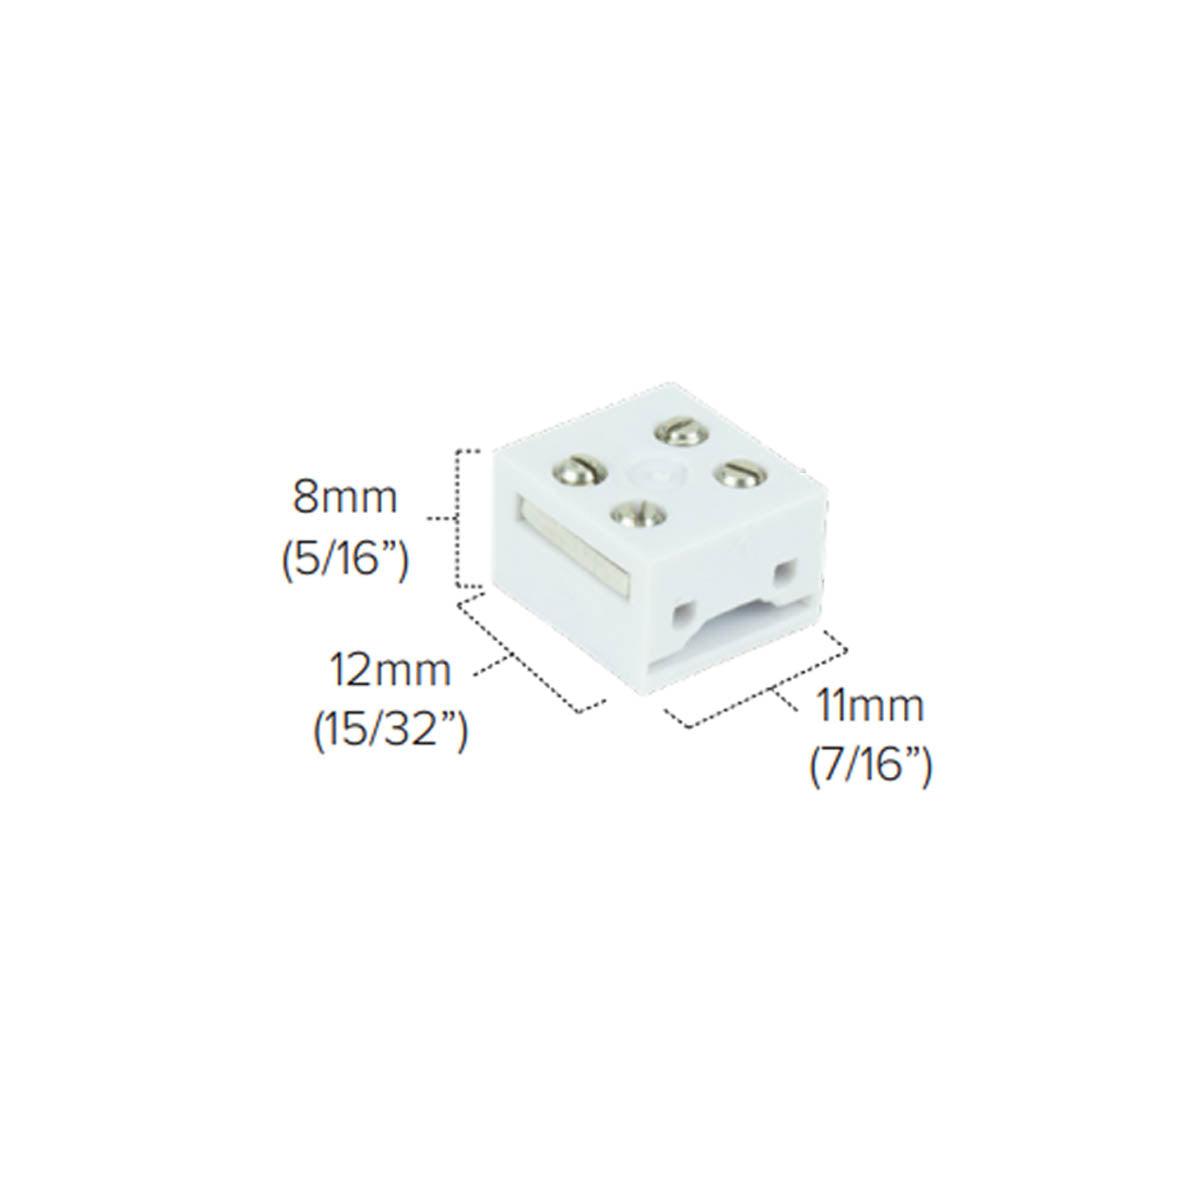 Trulink 4-in-1 Connector Block, Pack of 10